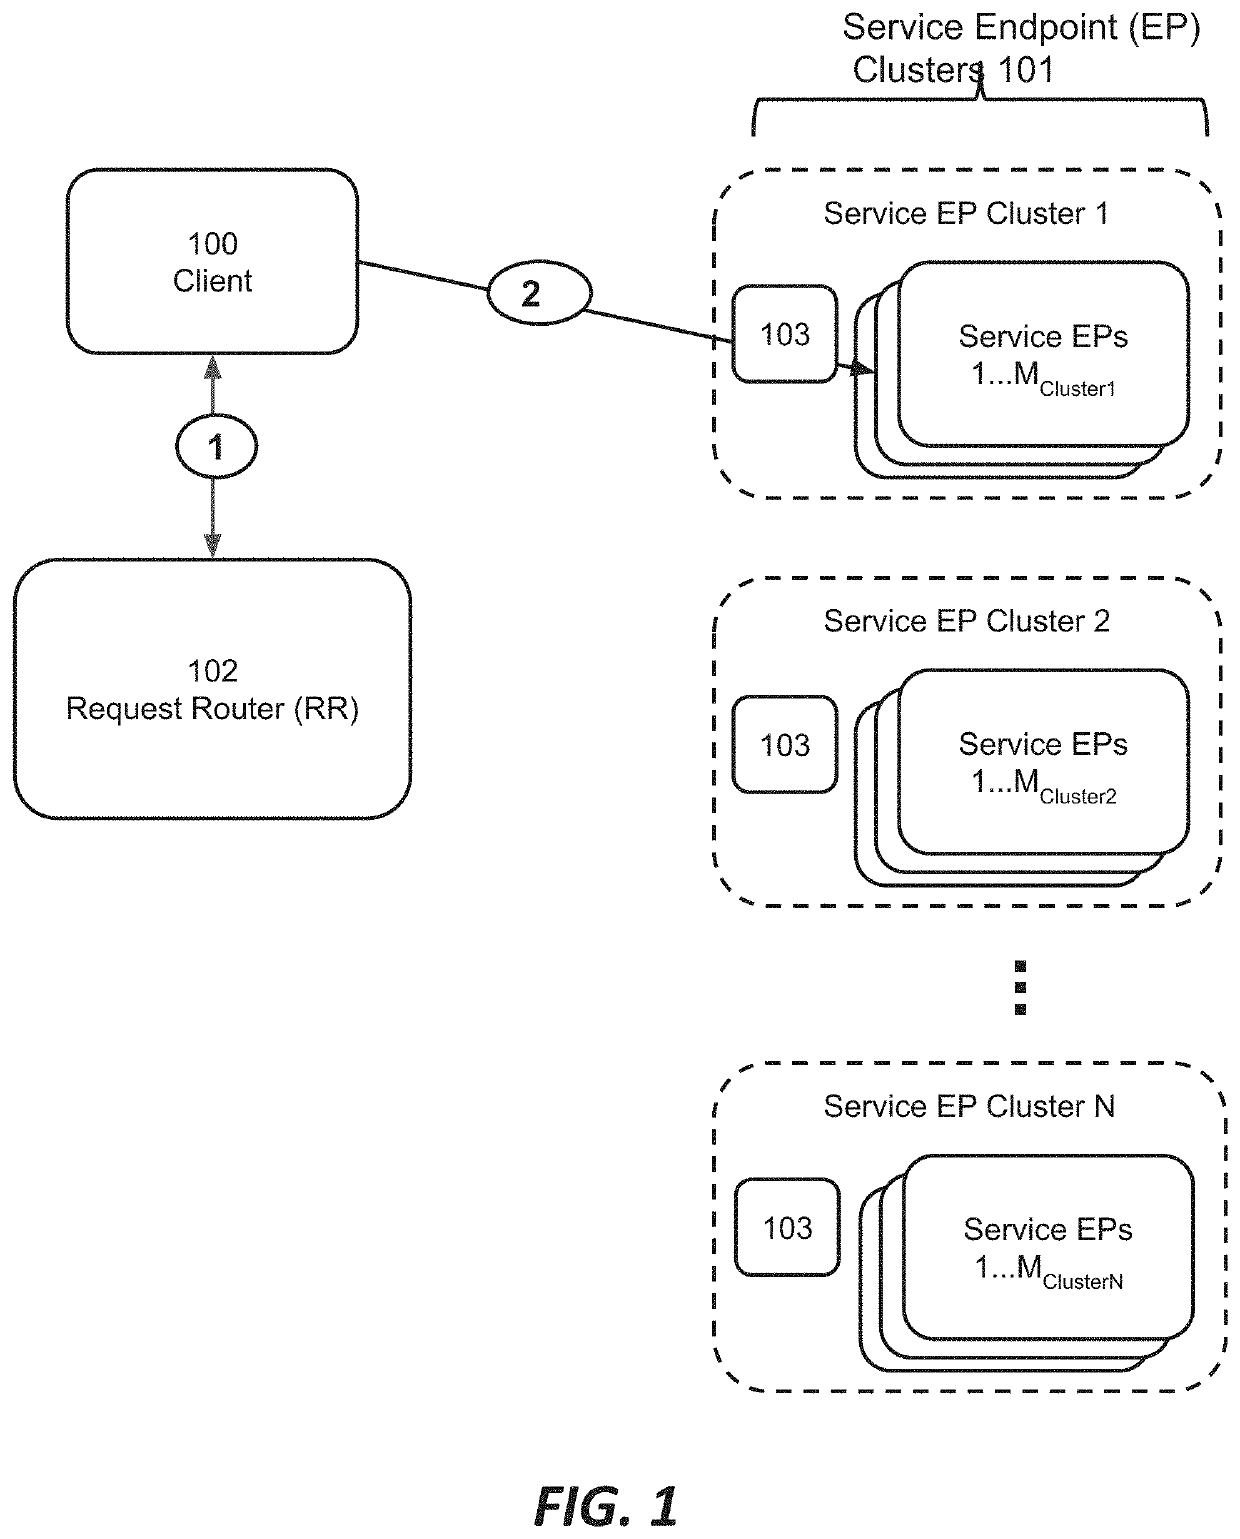 Using the state of a request routing mechanism to inform attack detection and mitigation